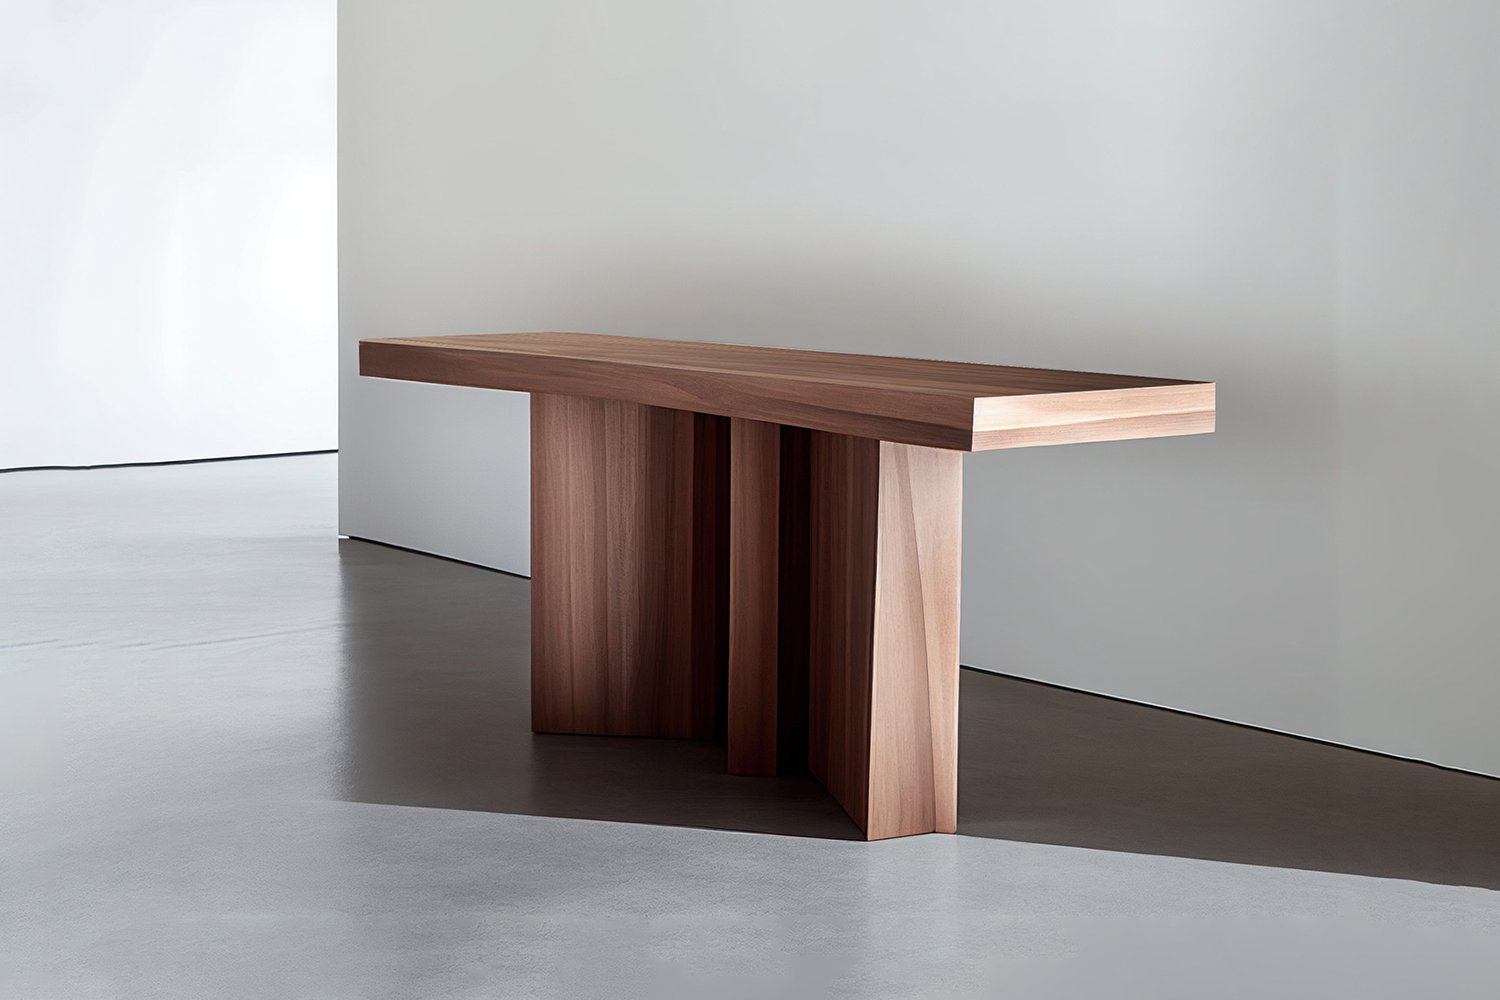 Sculptural Console Table, Sideboard Made of Solid Walnut Wood, Narrow Console by NONO Furniture — 2.jpg